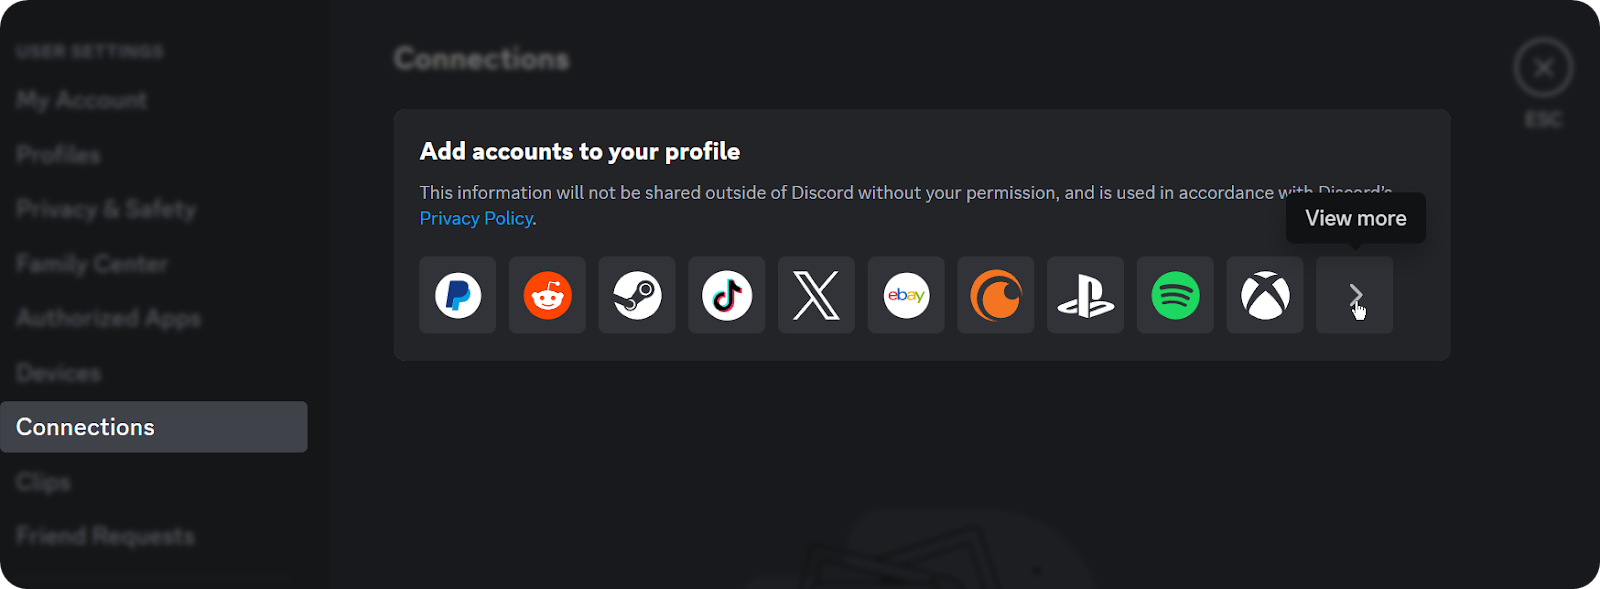 The Connections section of User Settings in Discord